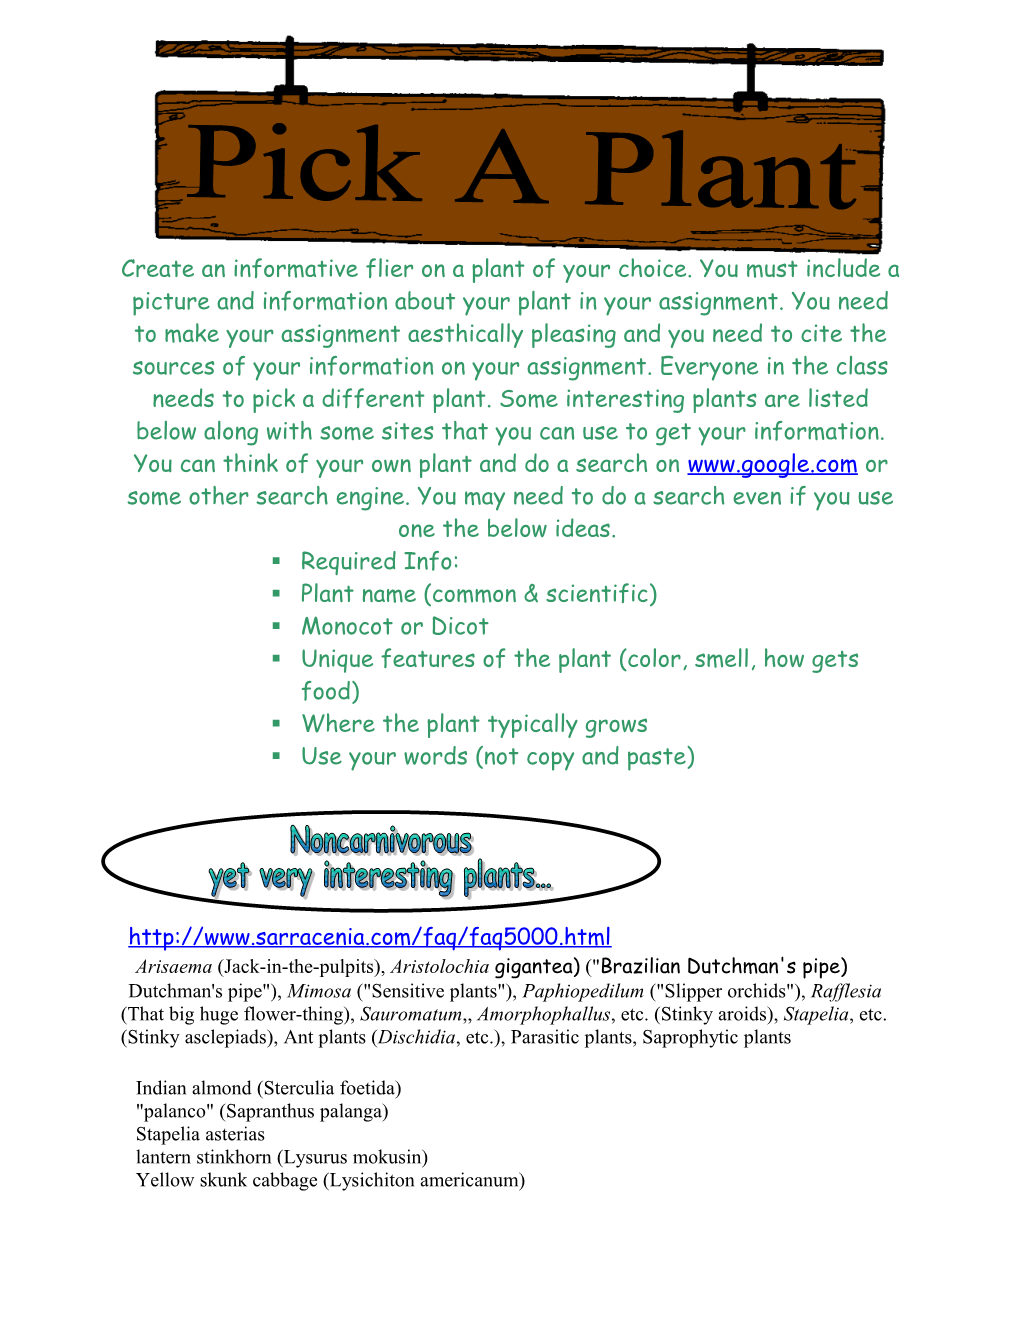 Create an Informative Flier Or Brochure on a Plant of Your Choice